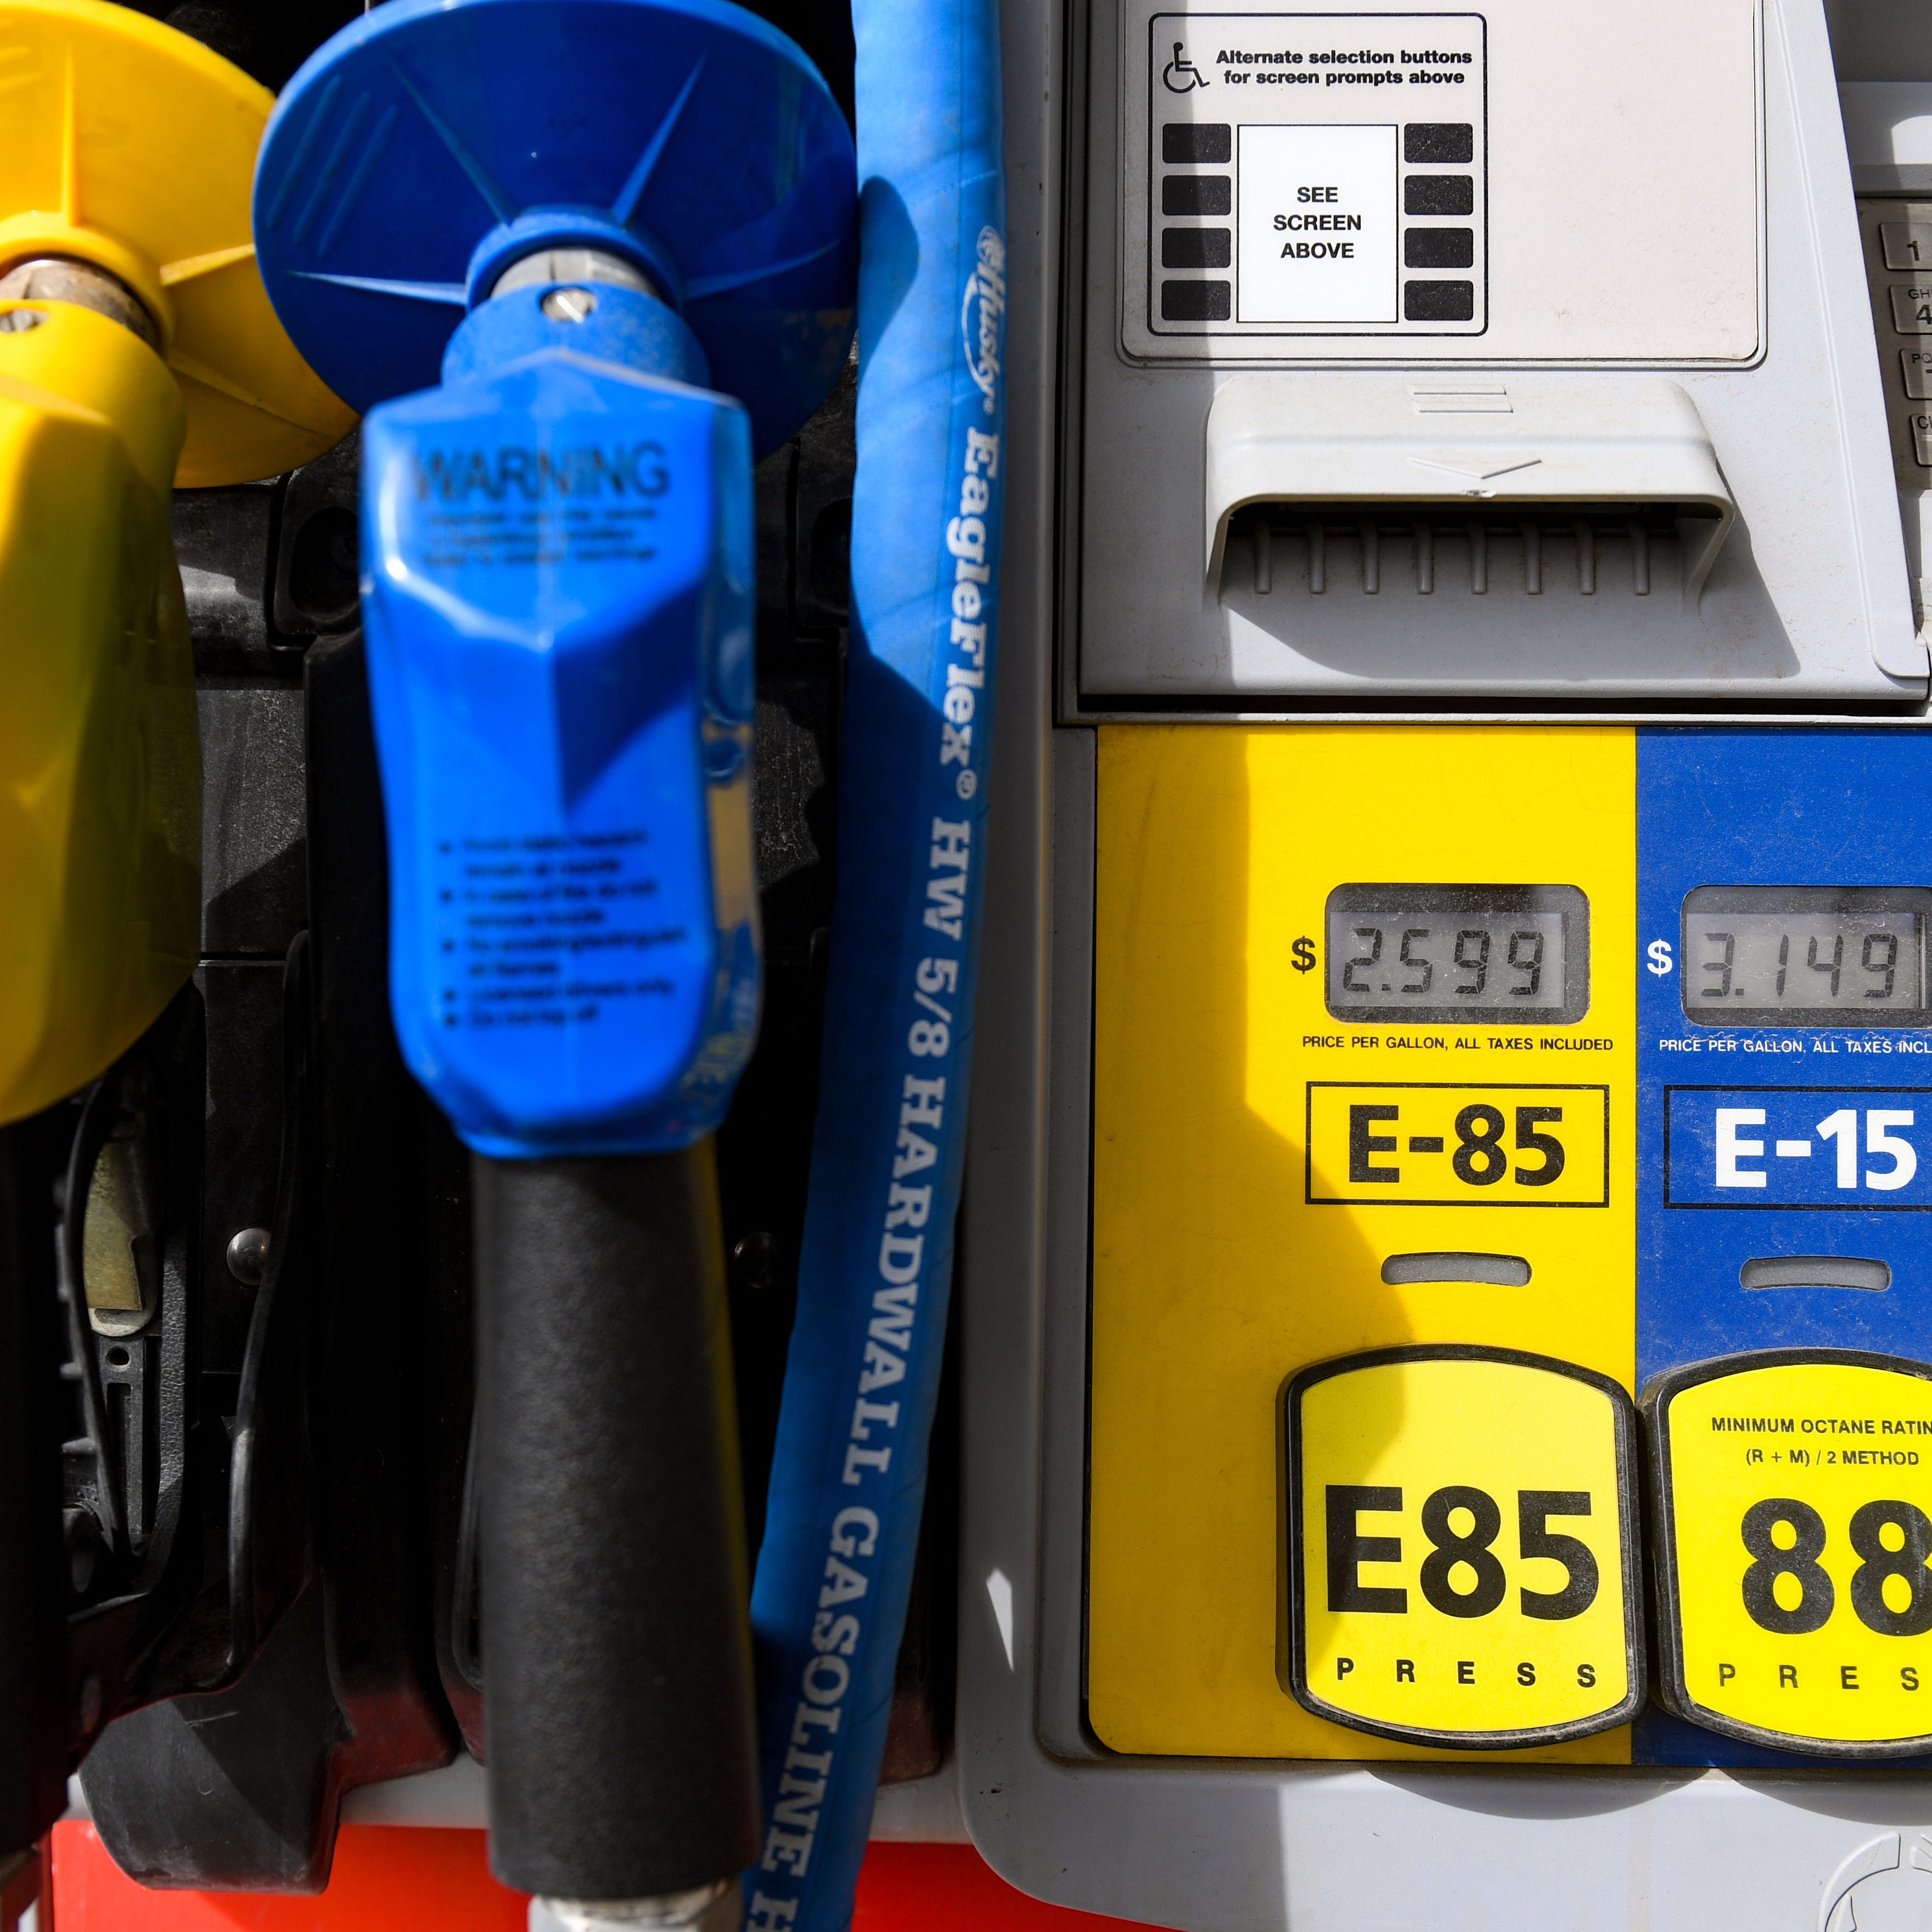 E-15 gasoline is available at a gas station on Wednesday, March 22, 2023, in Sioux Falls.